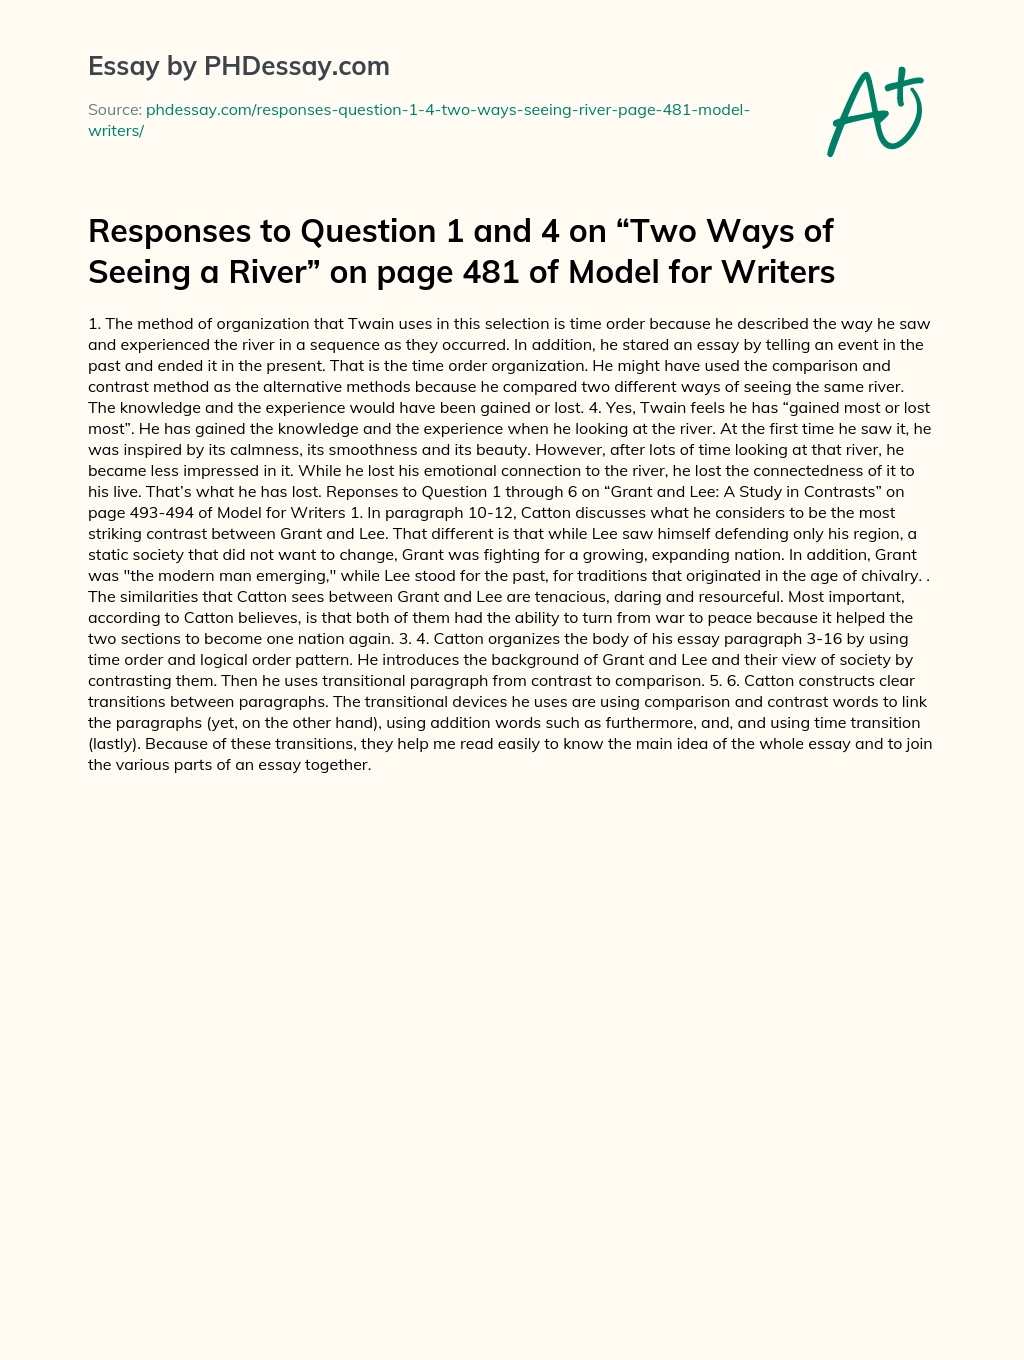 Responses to Question 1 and 4 on “Two Ways of Seeing a River” on page 481 of Model for Writers essay